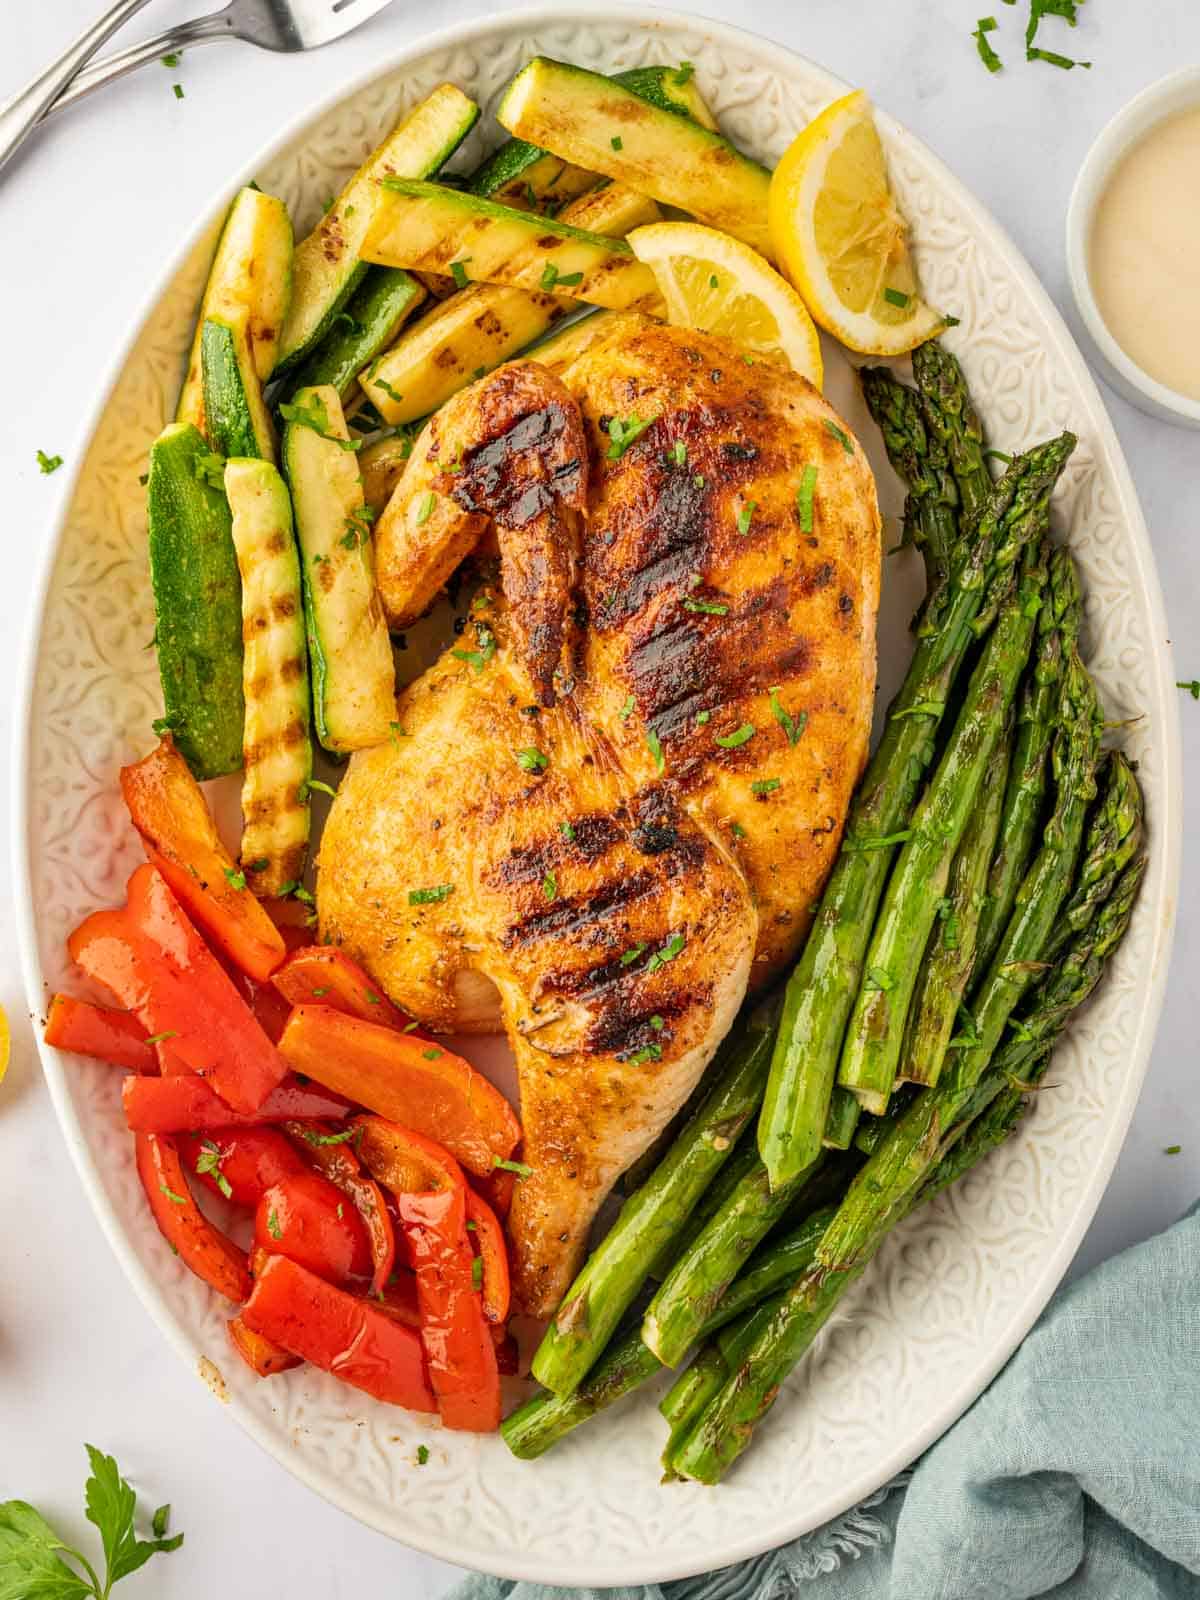 Grilled half chicken on a platter with grilled veggies.